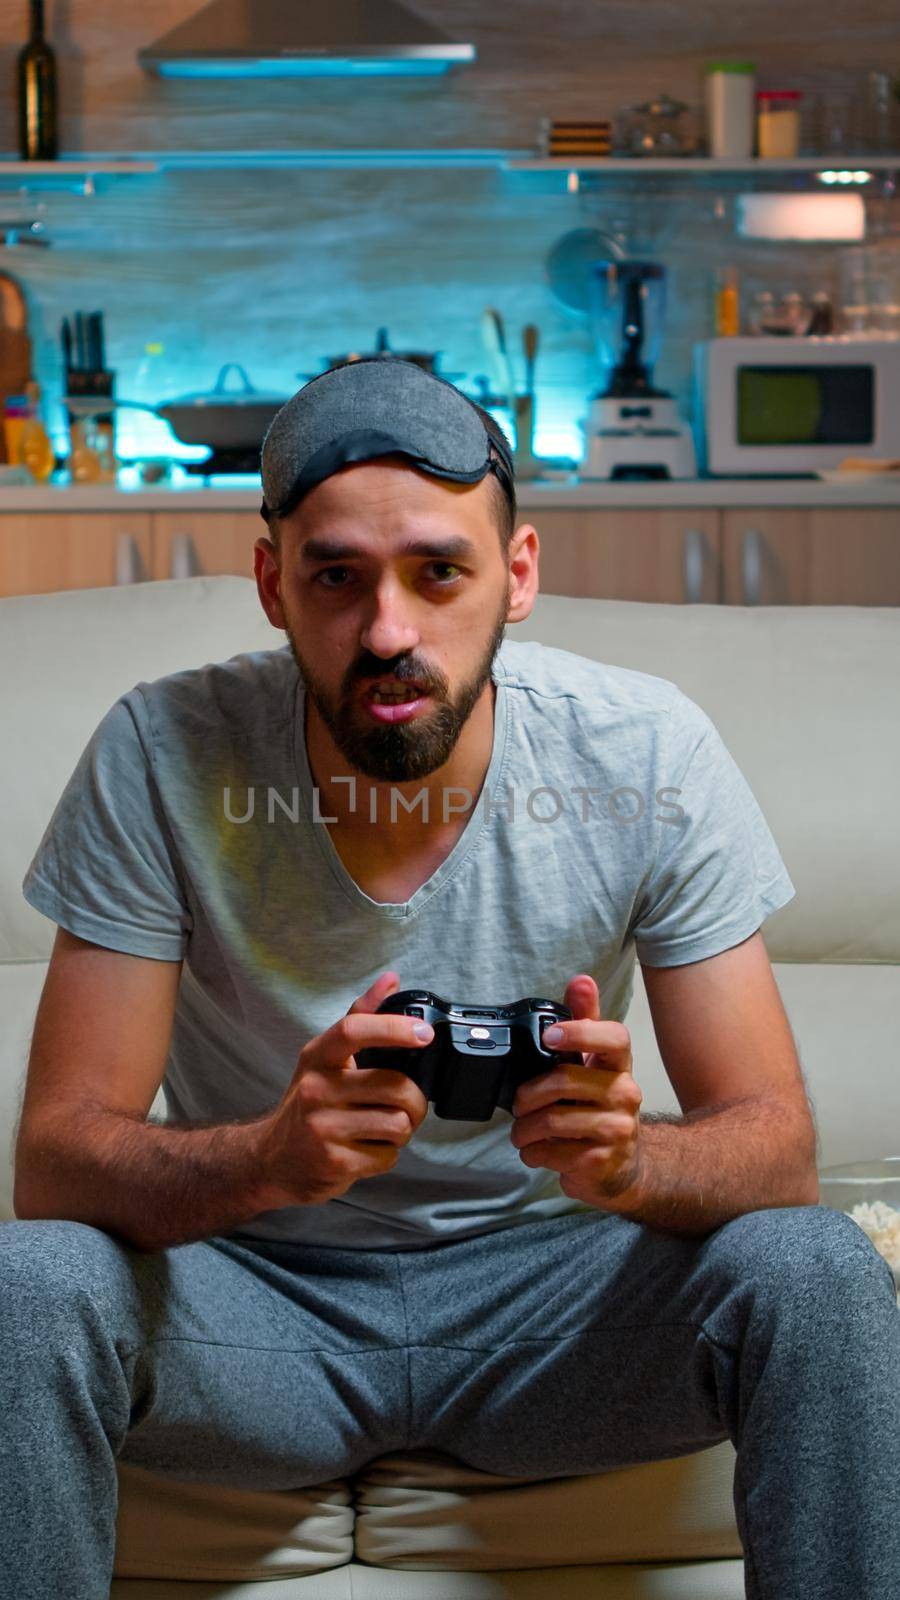 Focused man holding joystick while sitting in front of television winning online video games competition. Caucasian male with sleep mask lying on couch making winner gesture late at night in kitchen